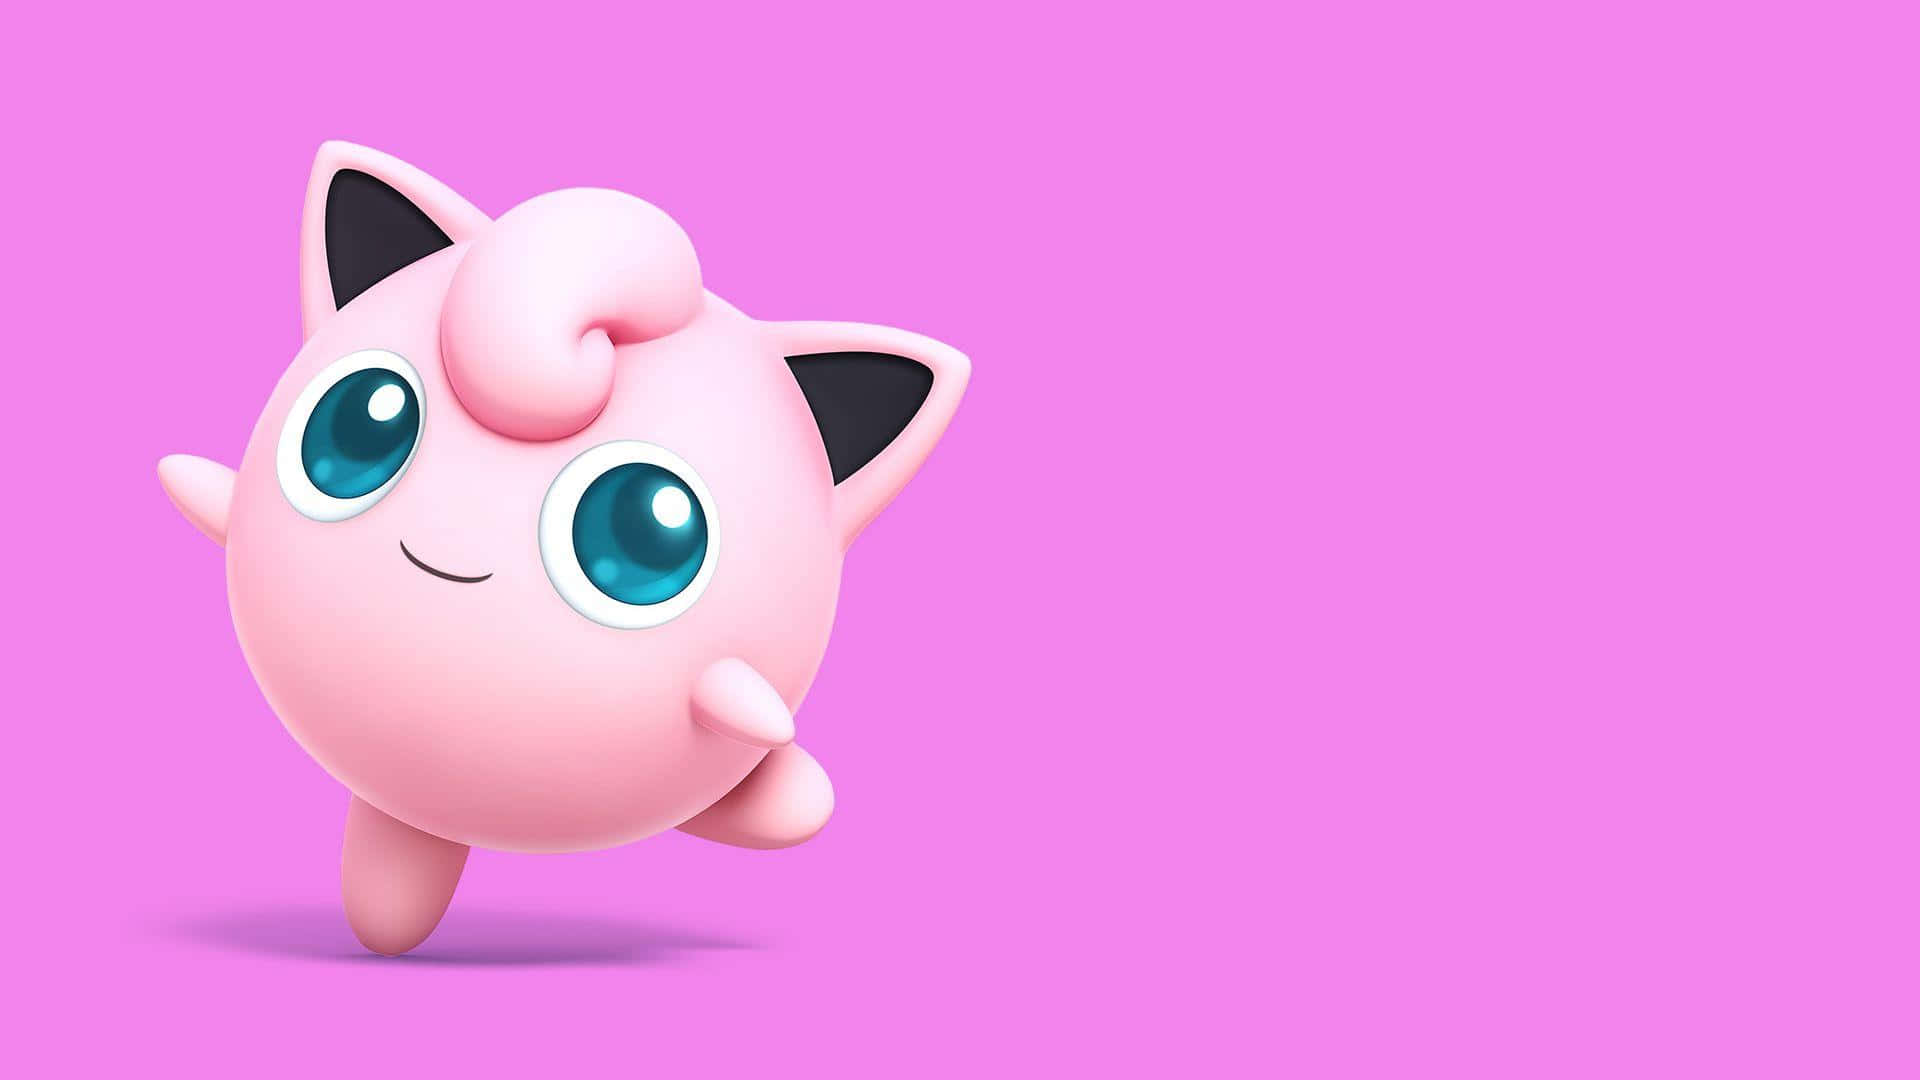 "Jigglypuff: an iconic image from the pop culture phenomenon, Pokemon!"